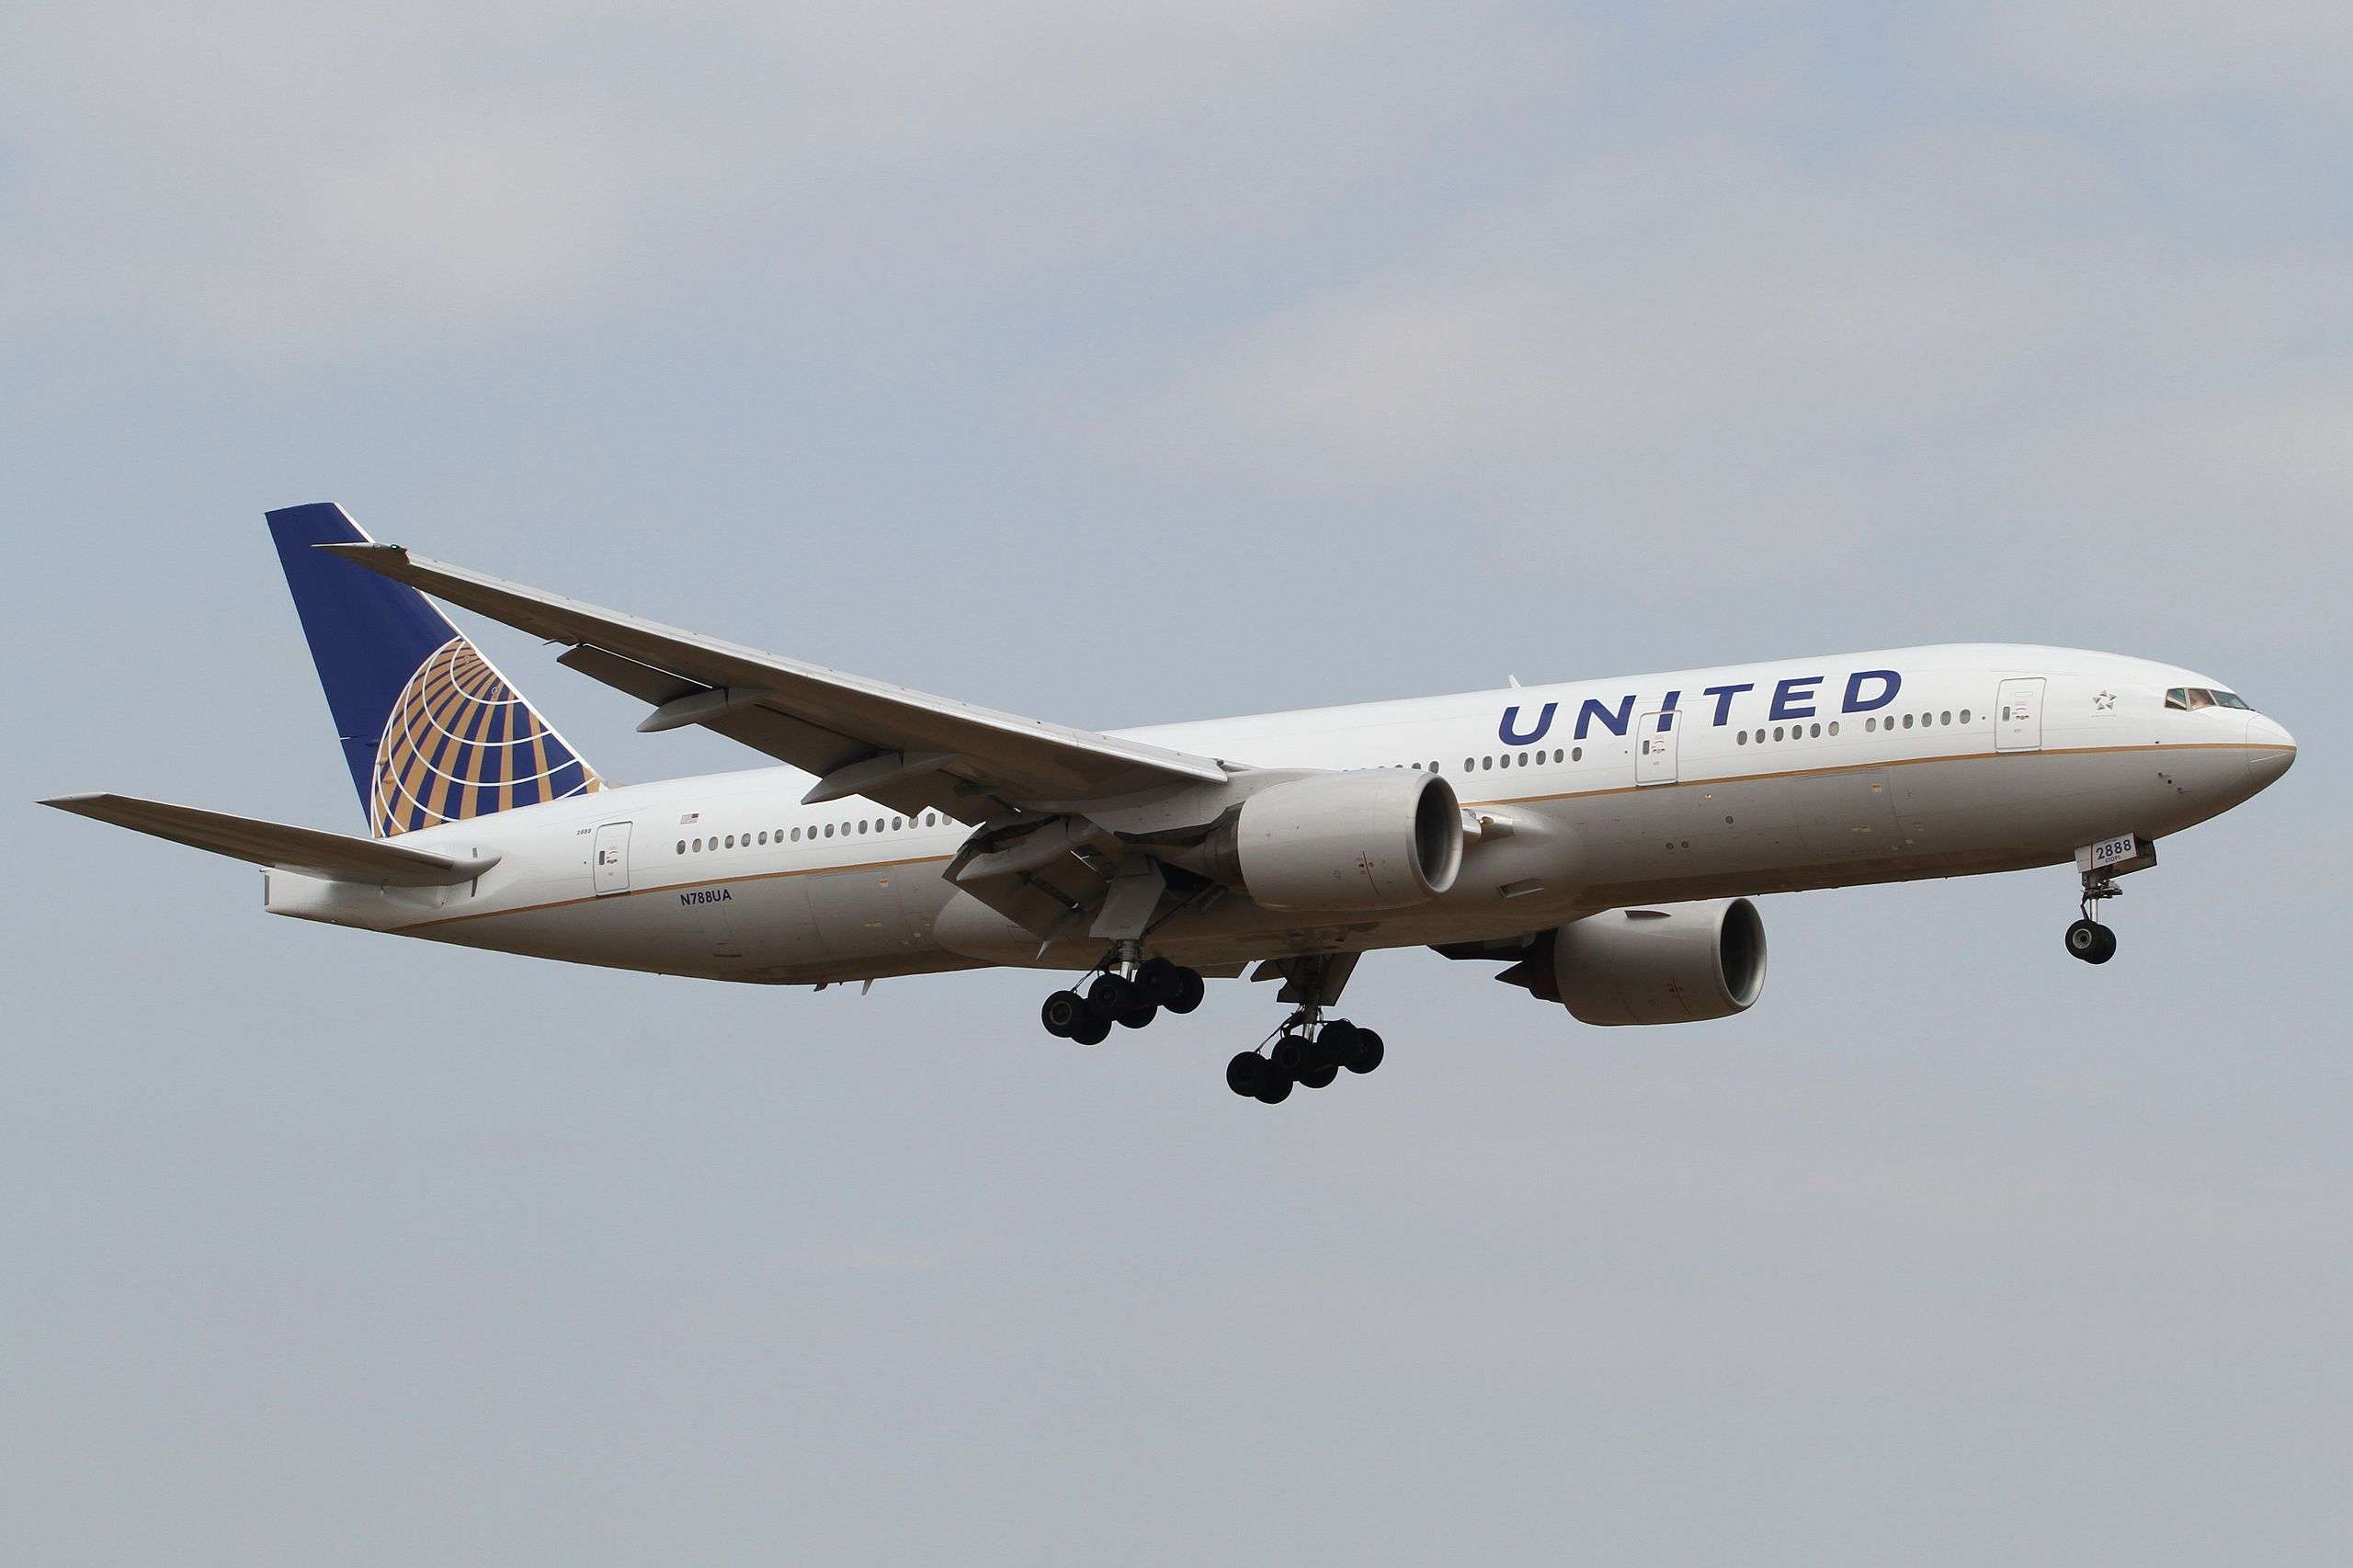 16 Injured Due to Turbulence on United 777 Los Angeles-New York